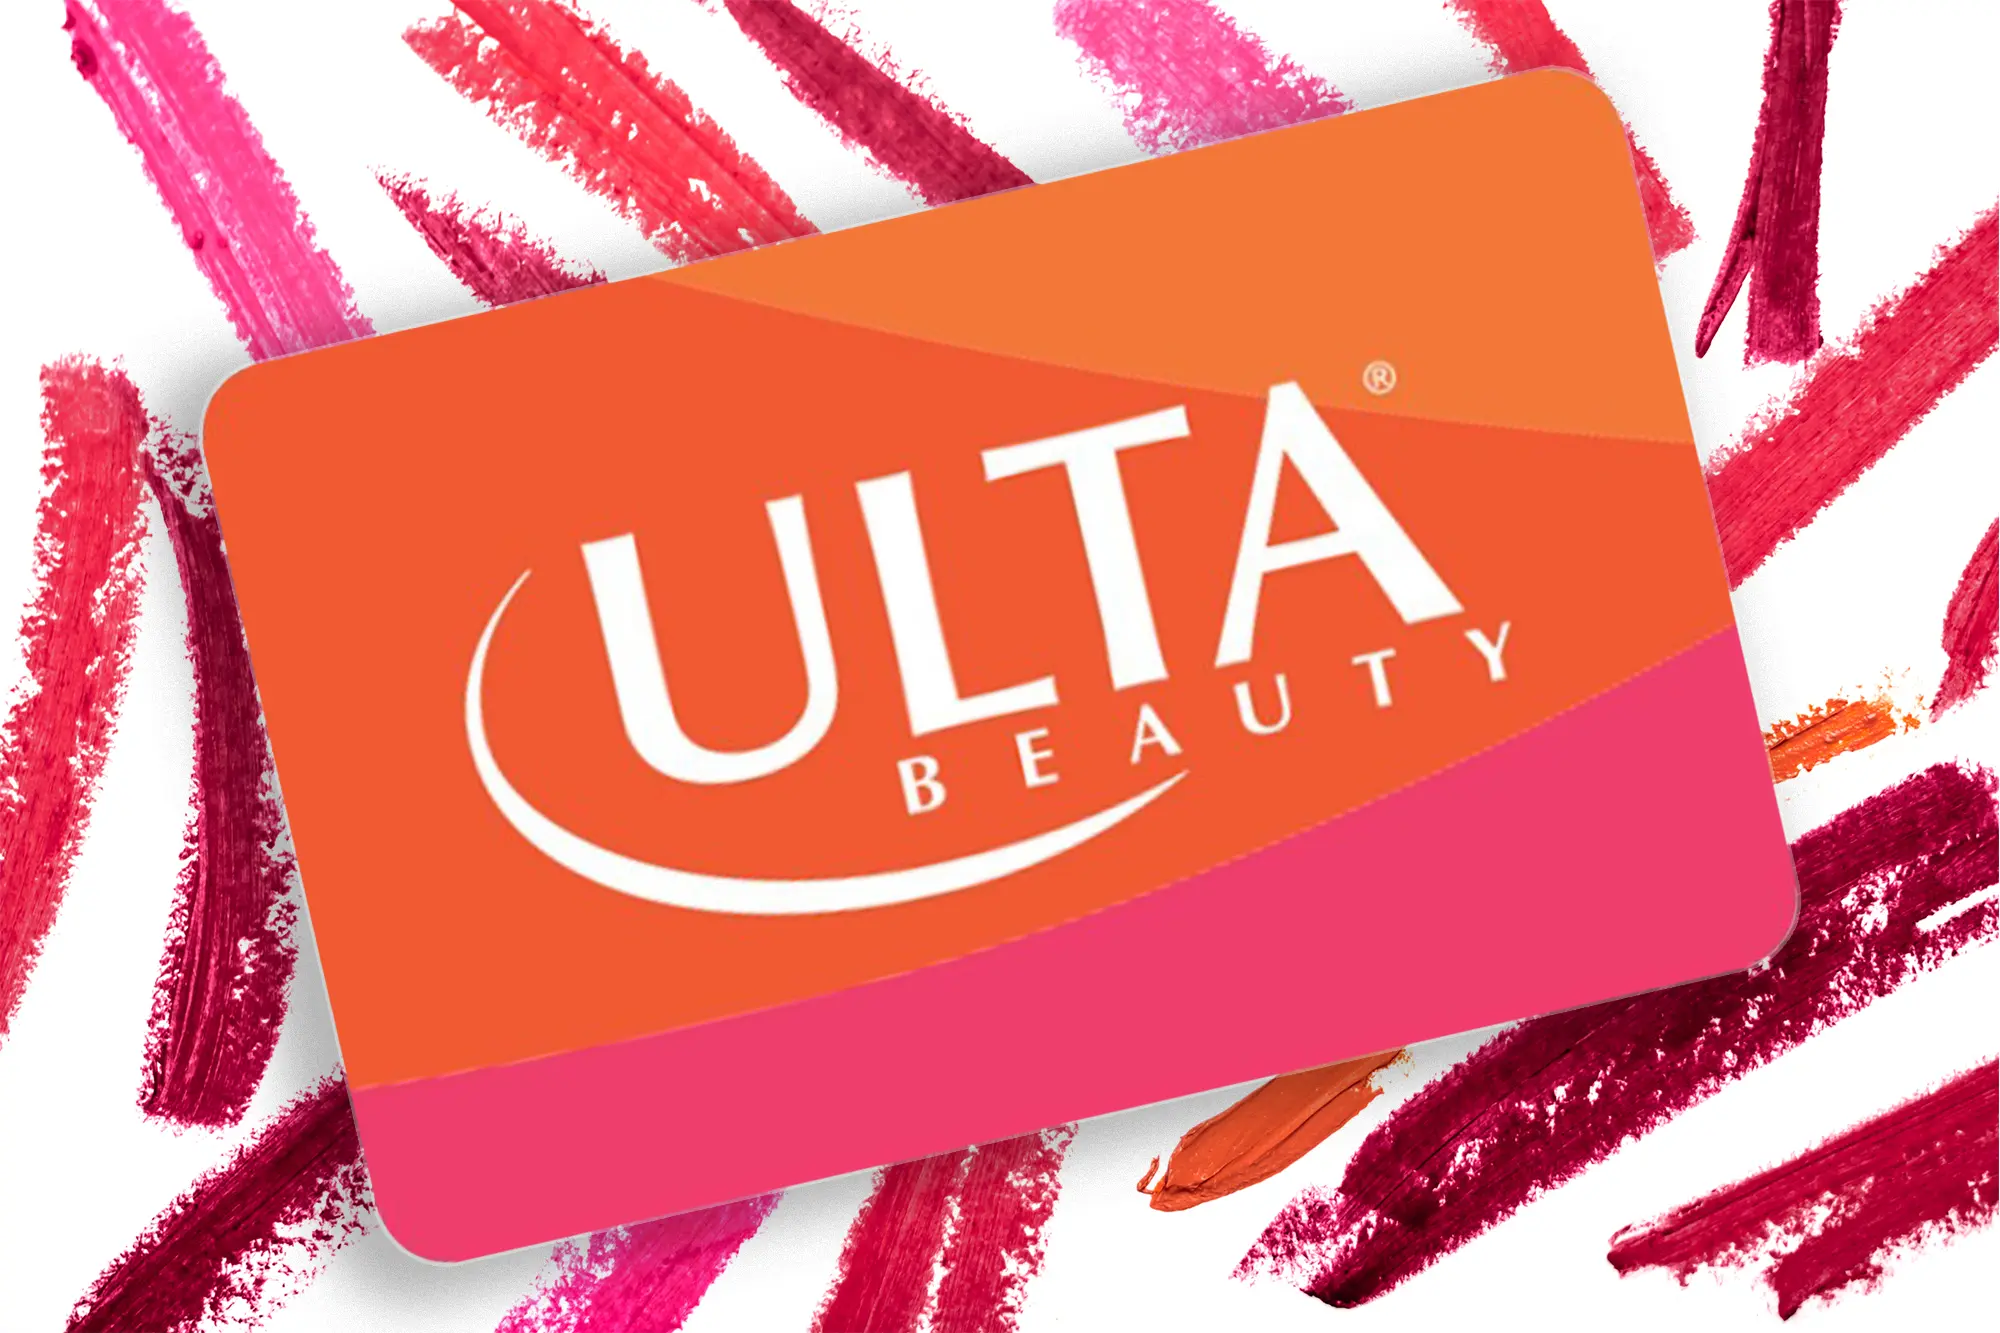 Ulta Beauty Incredibly Successful Omnichannel Brick And Mortar Strategy